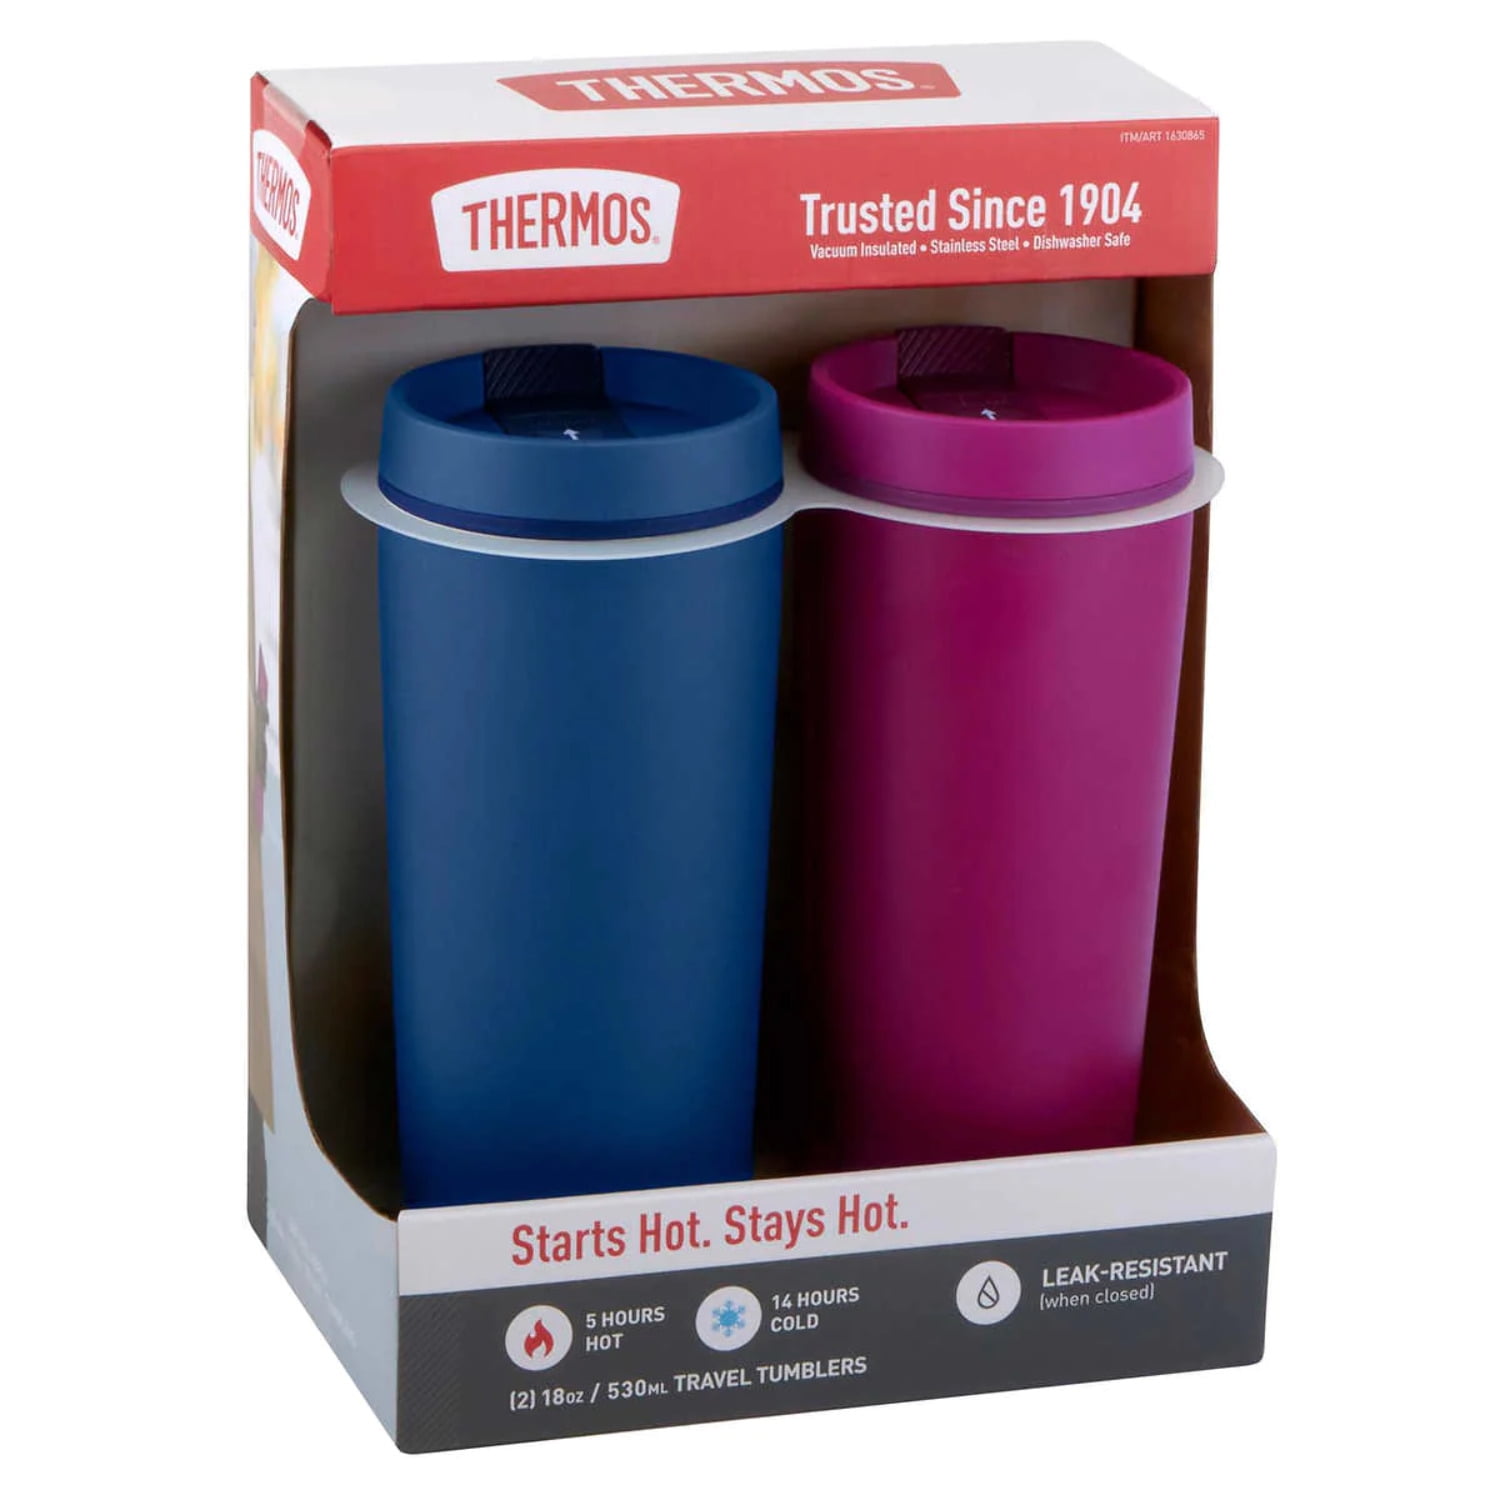 Costco Thermos Thermos Stainless Steel 18oz Travel Tumbler, 2-pack 29.99